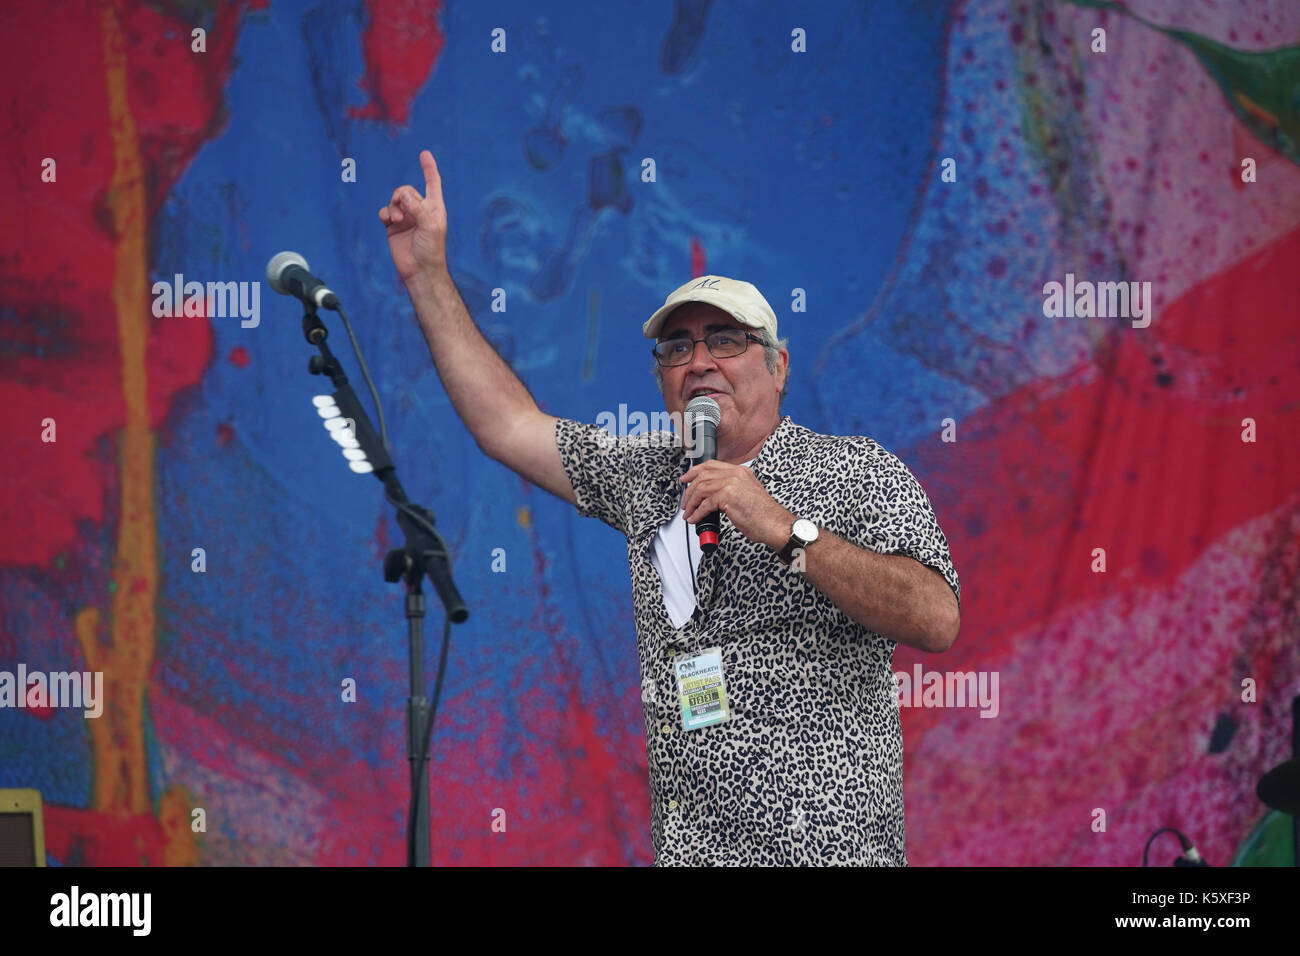 London, UK. 10th September, 2017. Danny Baker introducing Jake Bugg on the Main Stage at the 2017 OnBlackheath Festival in Blackheath, London. Photo date: Sunday, September 10, 2017. Photo credit should read: Roger Garfield/Alamy Live News Stock Photo